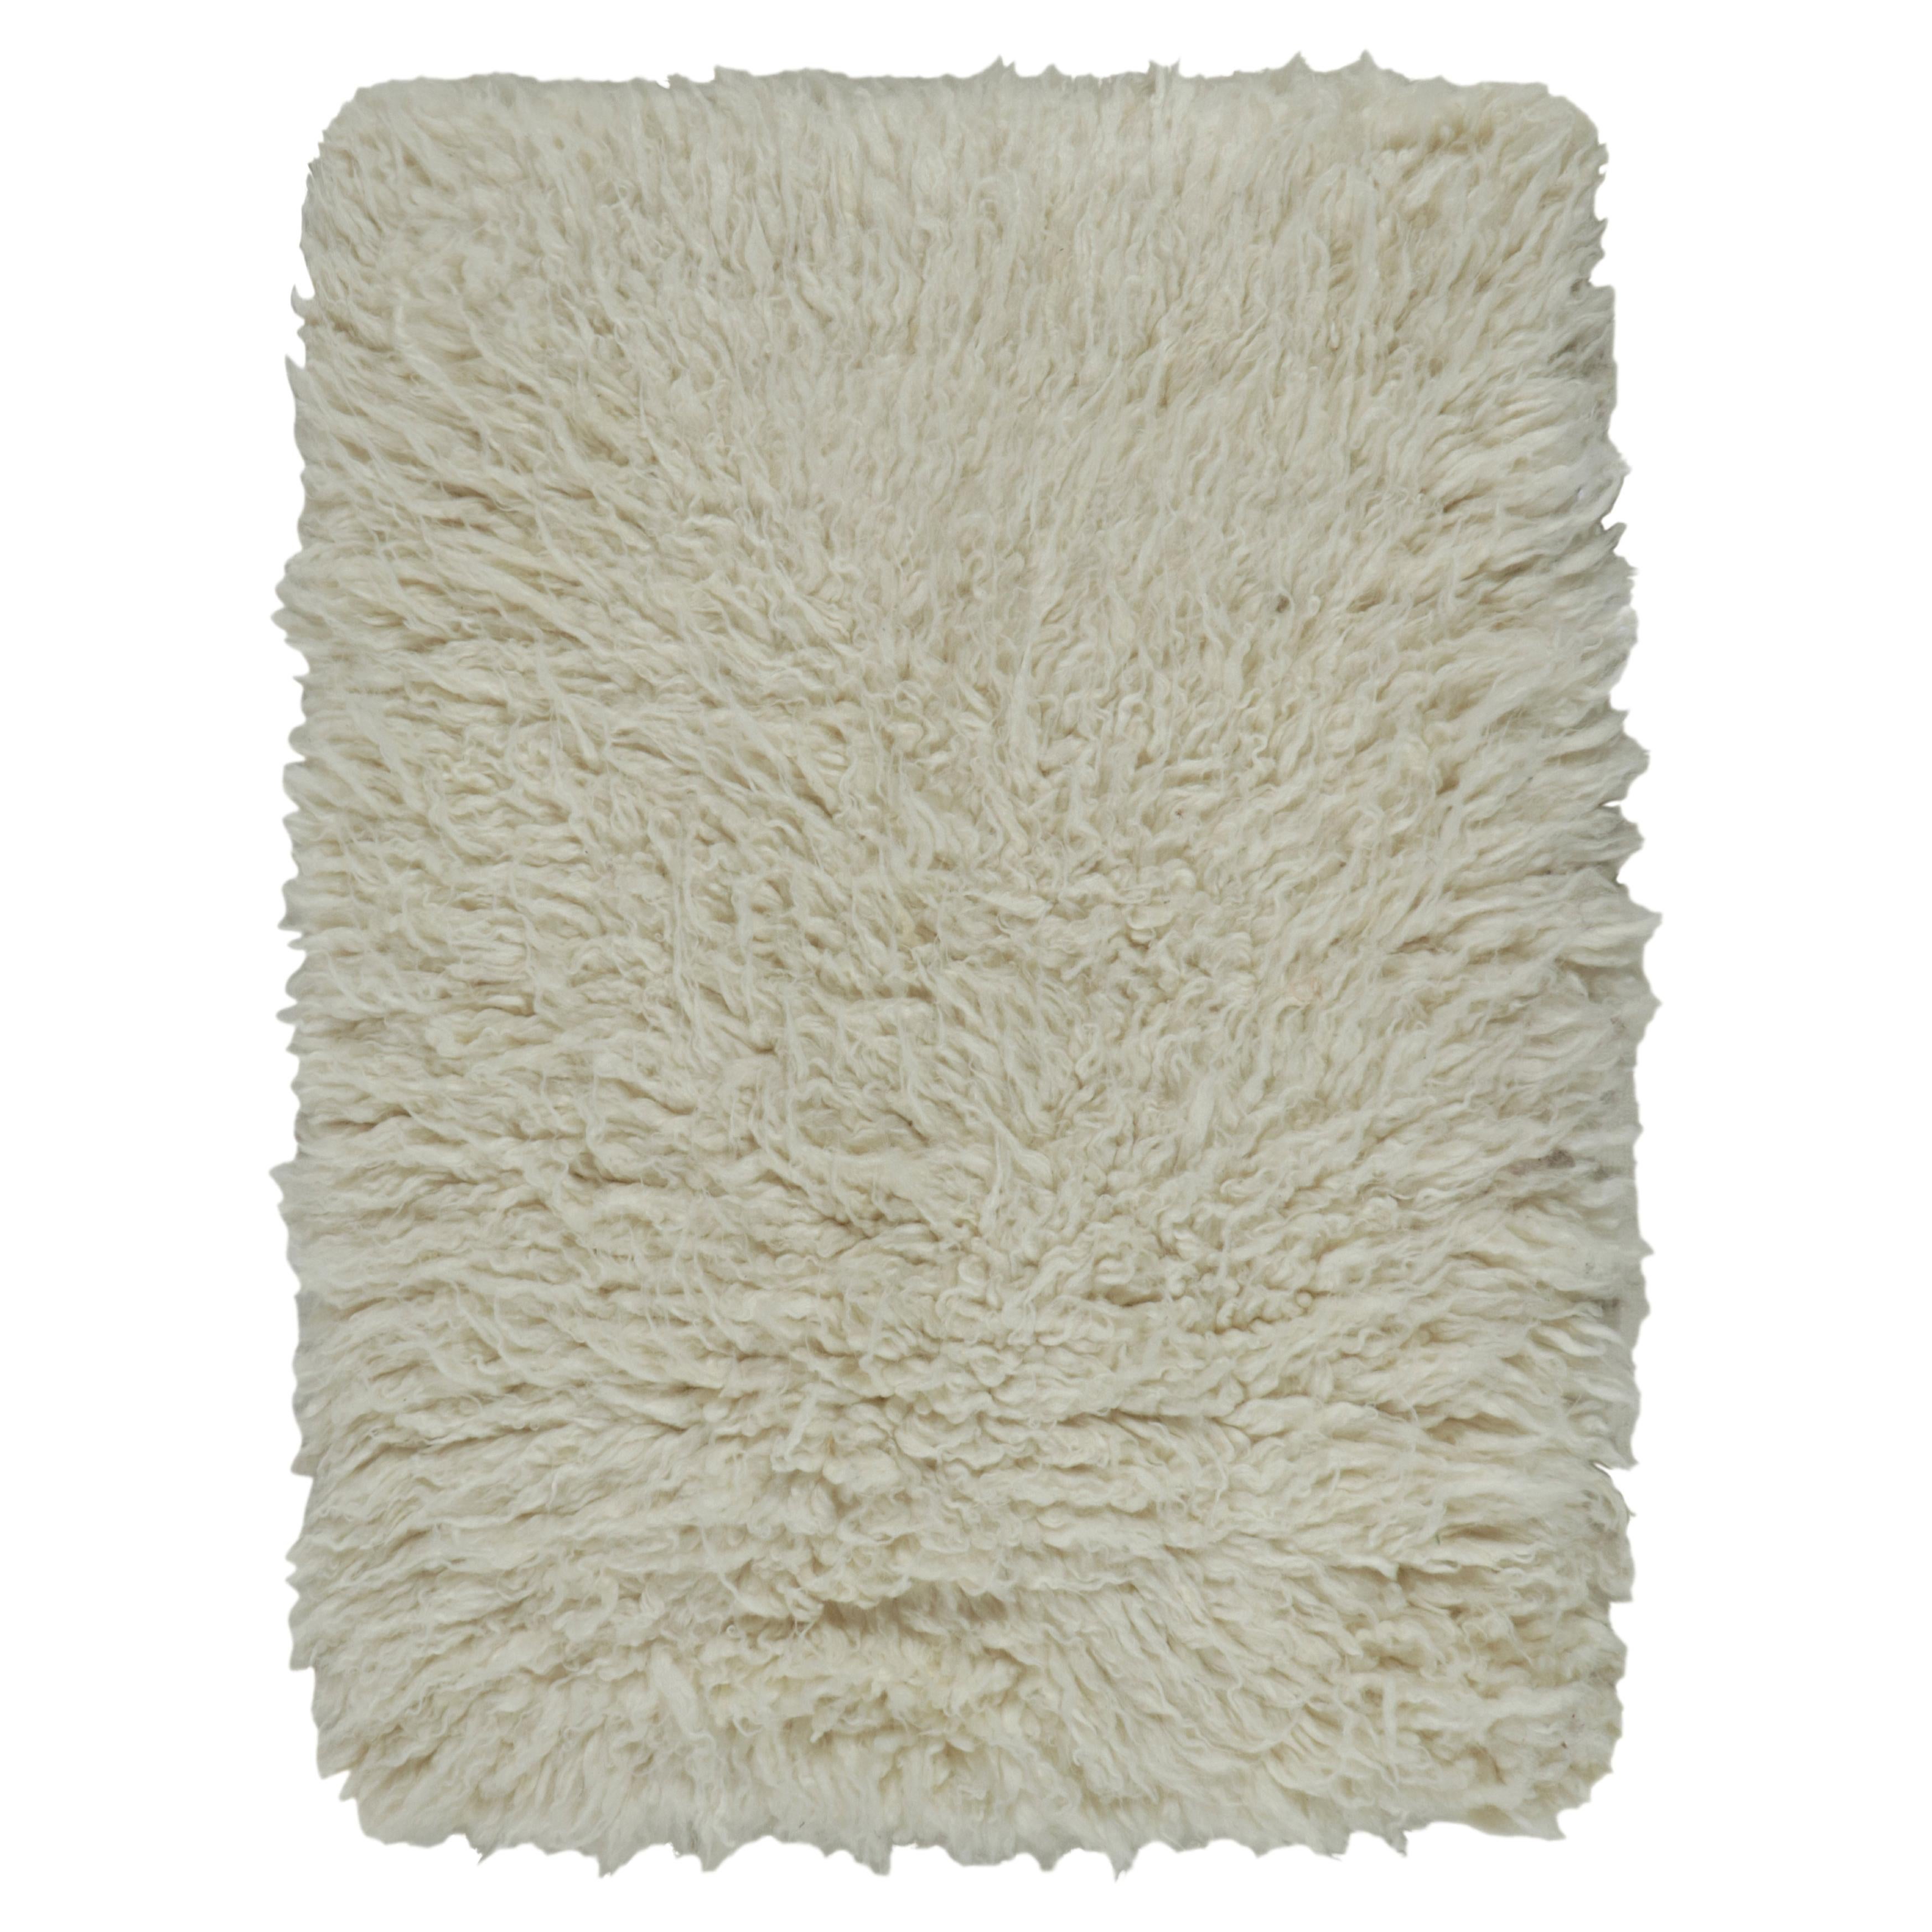 Rug & Kilim's Contemporary Moroccan style rug in Off White Shag Pile